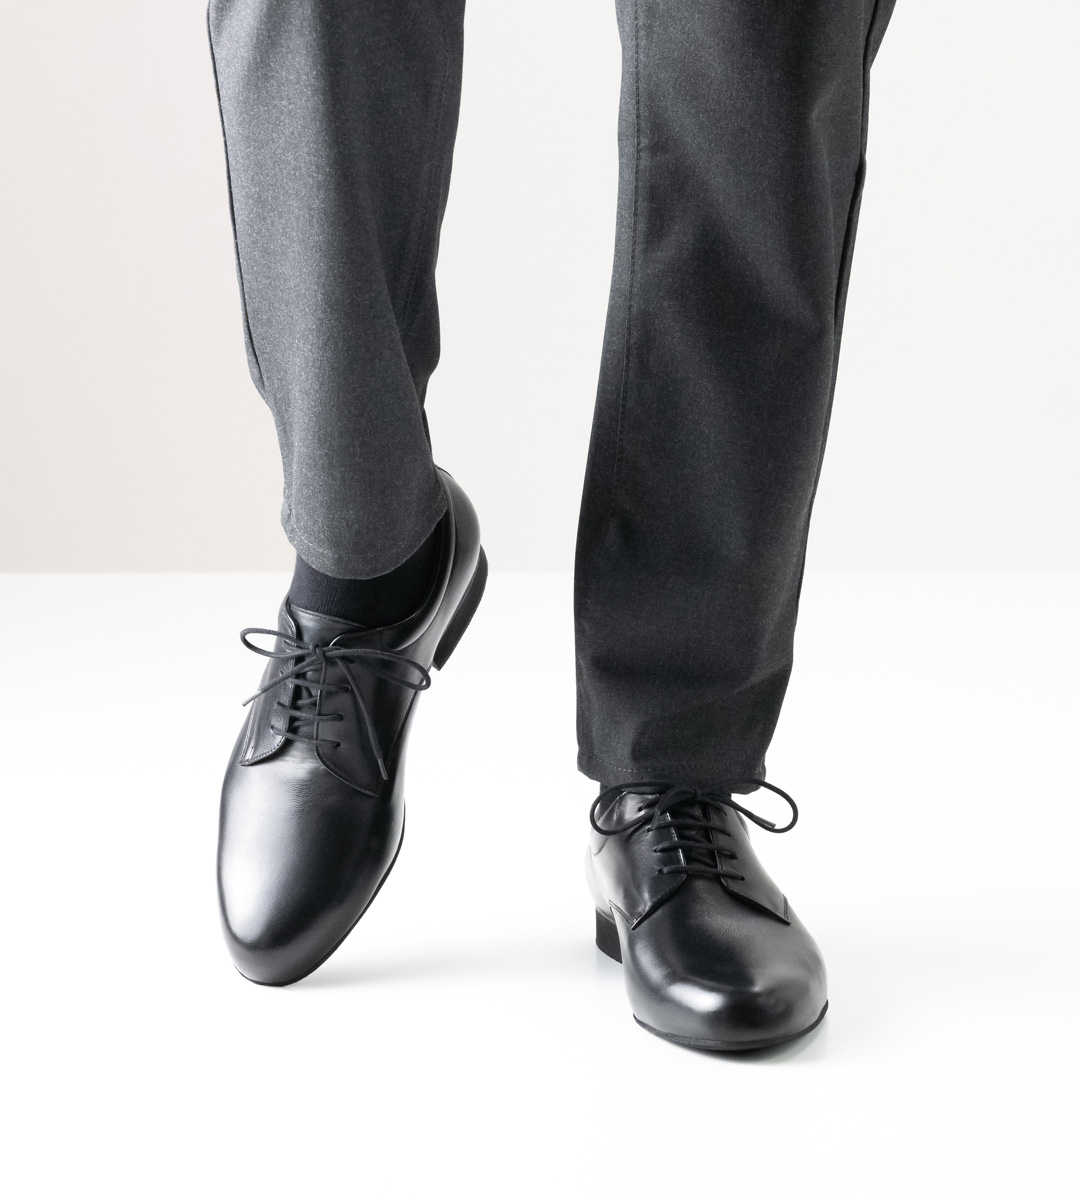 Werner Kern Men's Dance Shoe in Black Leather in Combination with Black Trousers